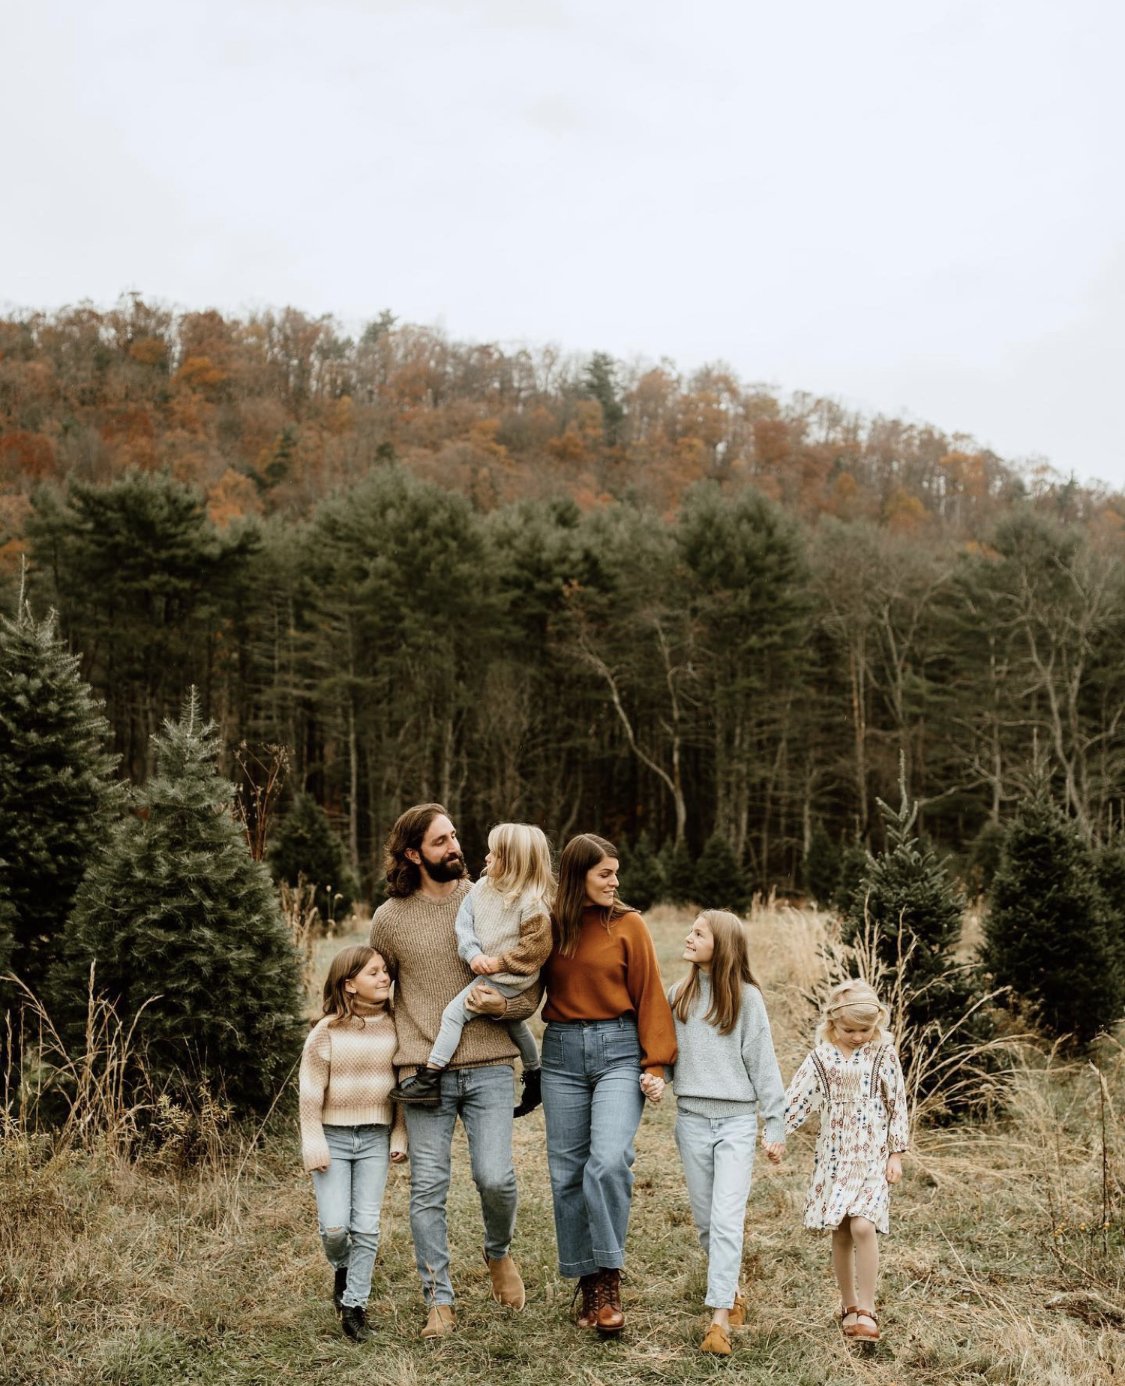 Colorful Ideas for Family Picture Outfits: Gray Edition